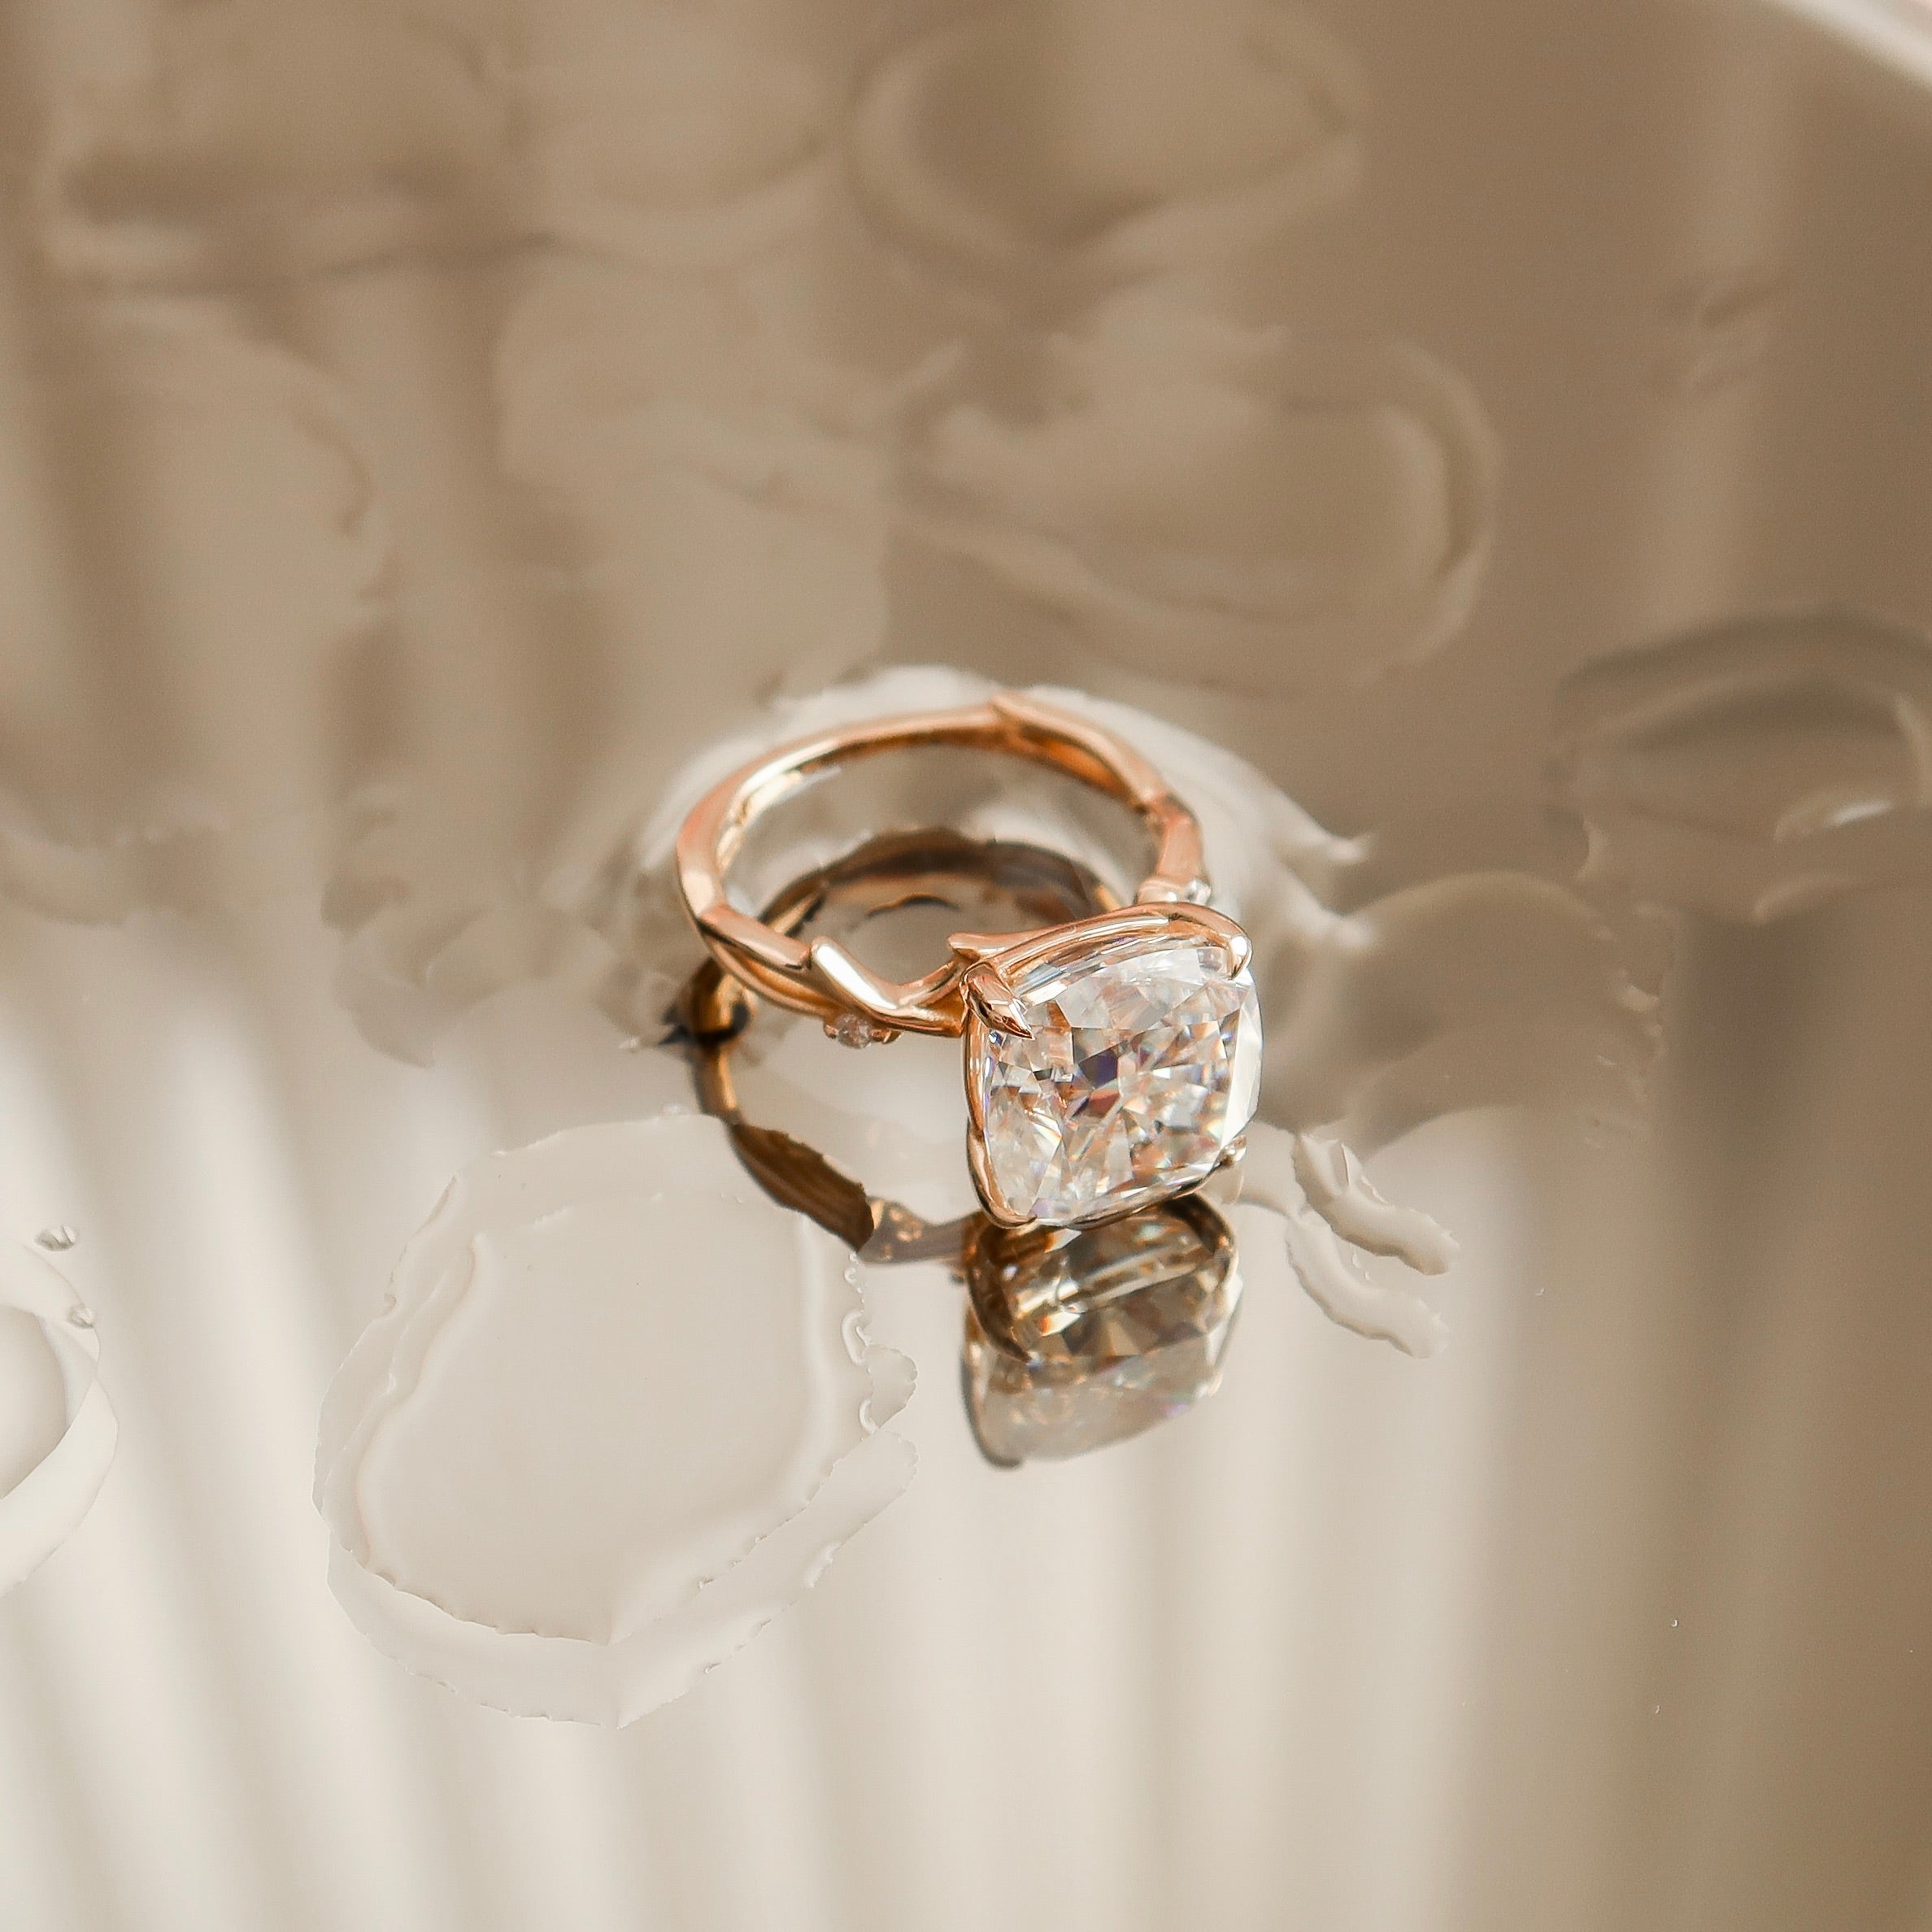 How to Clean Diamond Ring - How to Clean Rings - How to Clean a Ring